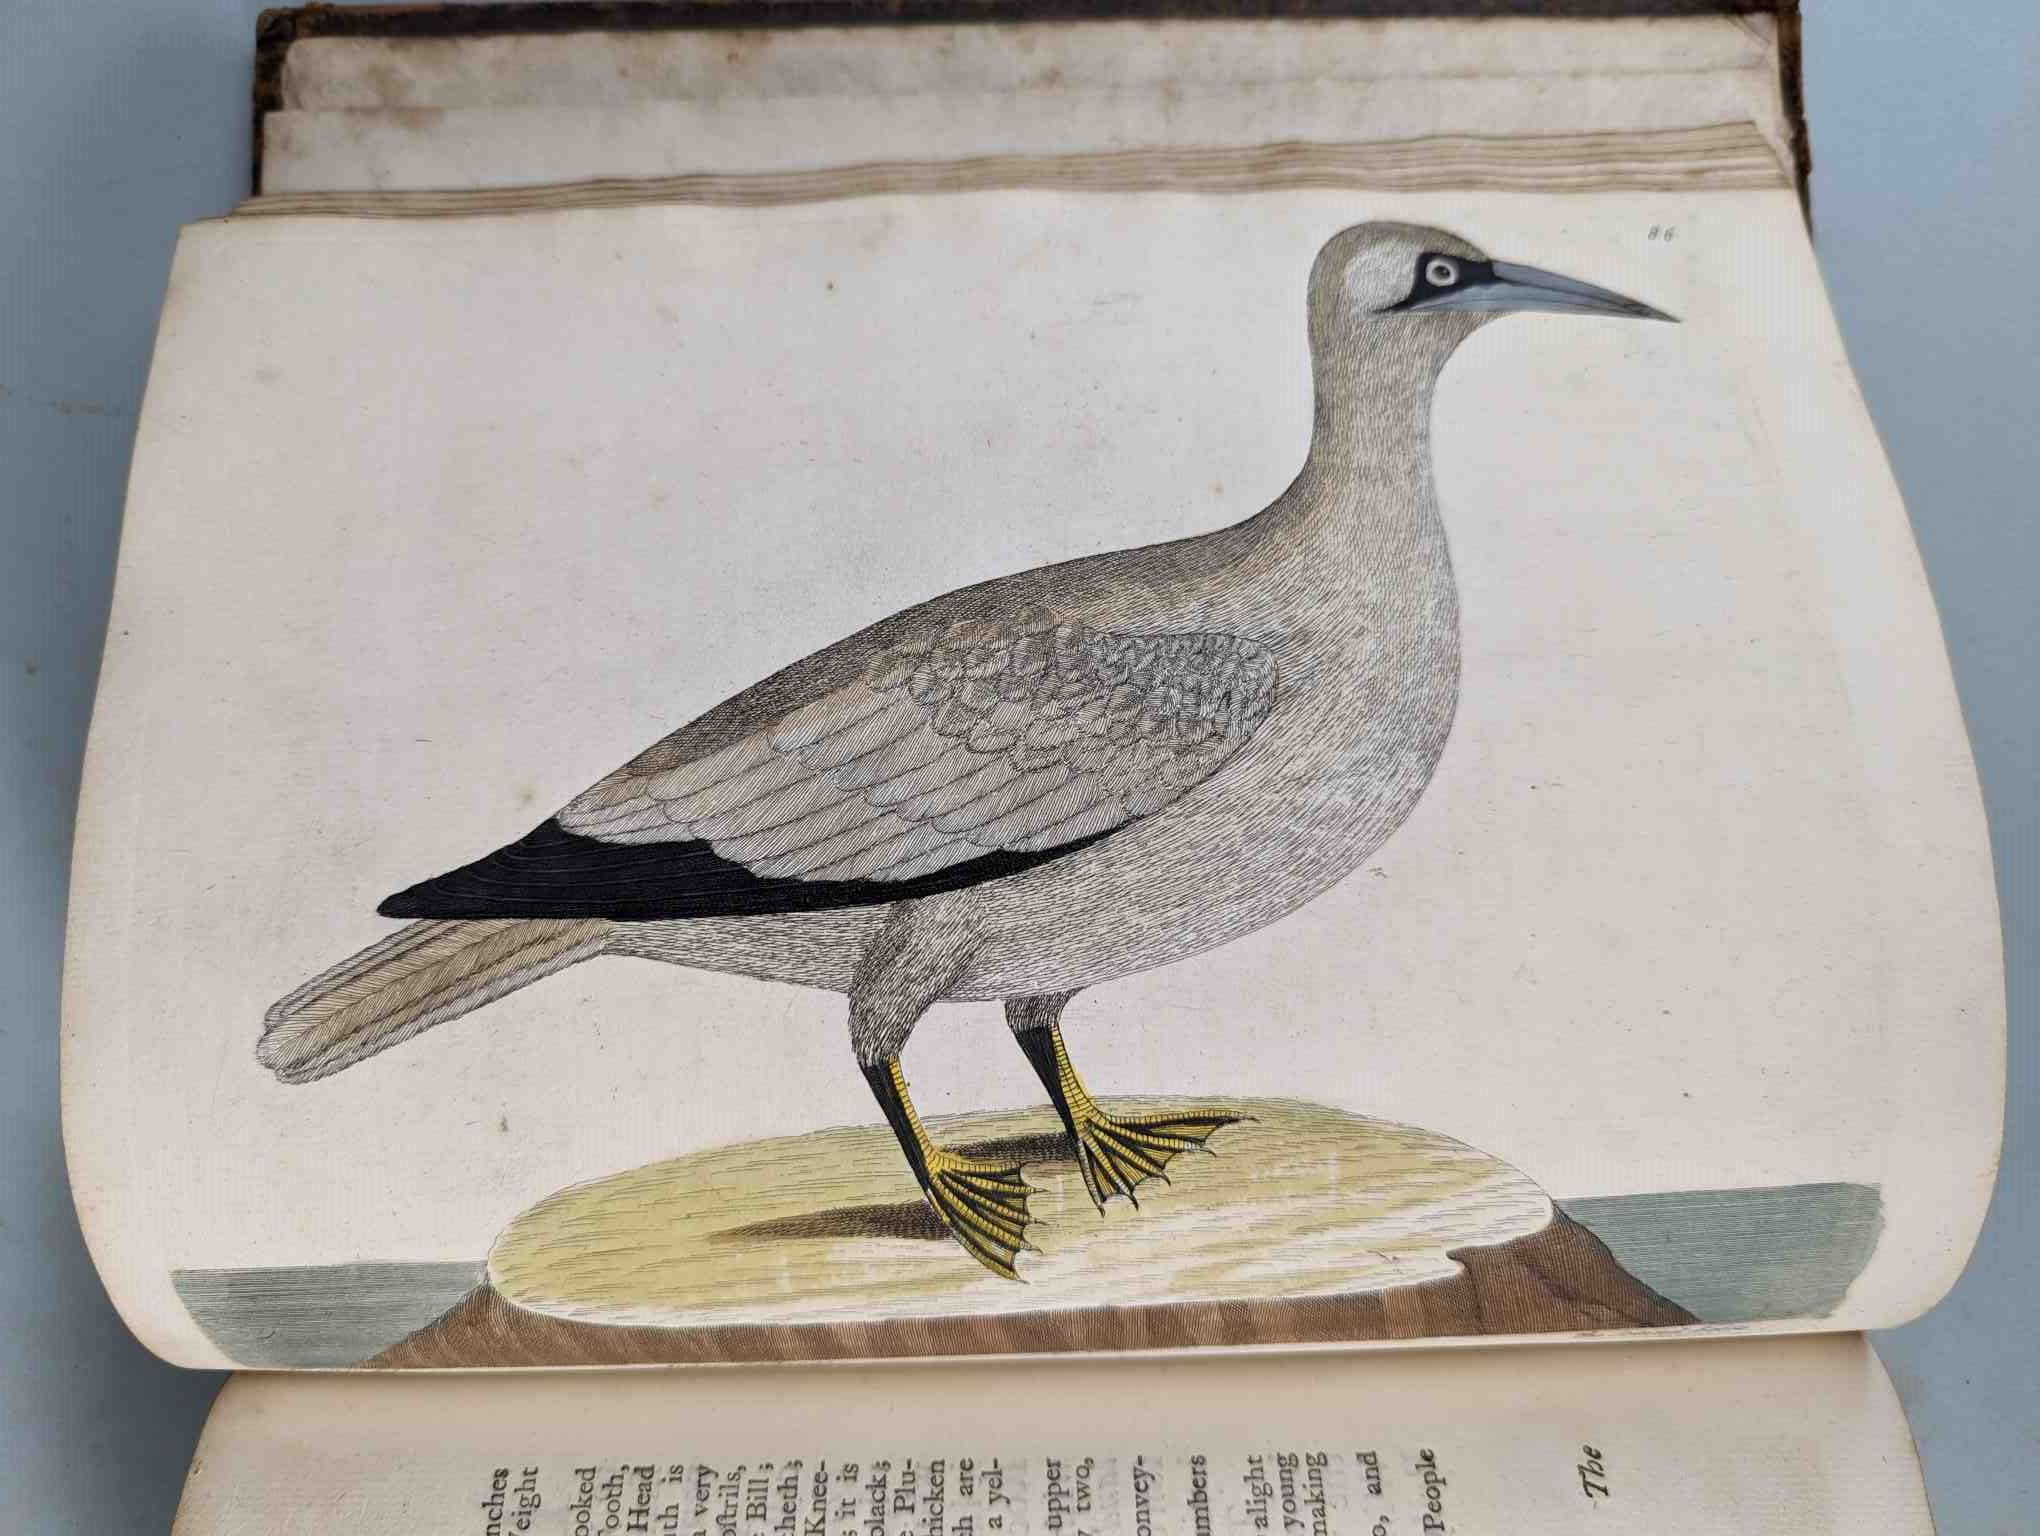 ALBIN, Eleazar. A Natural History of Birds, to which are added, Notes and Observations by W. - Image 89 of 208